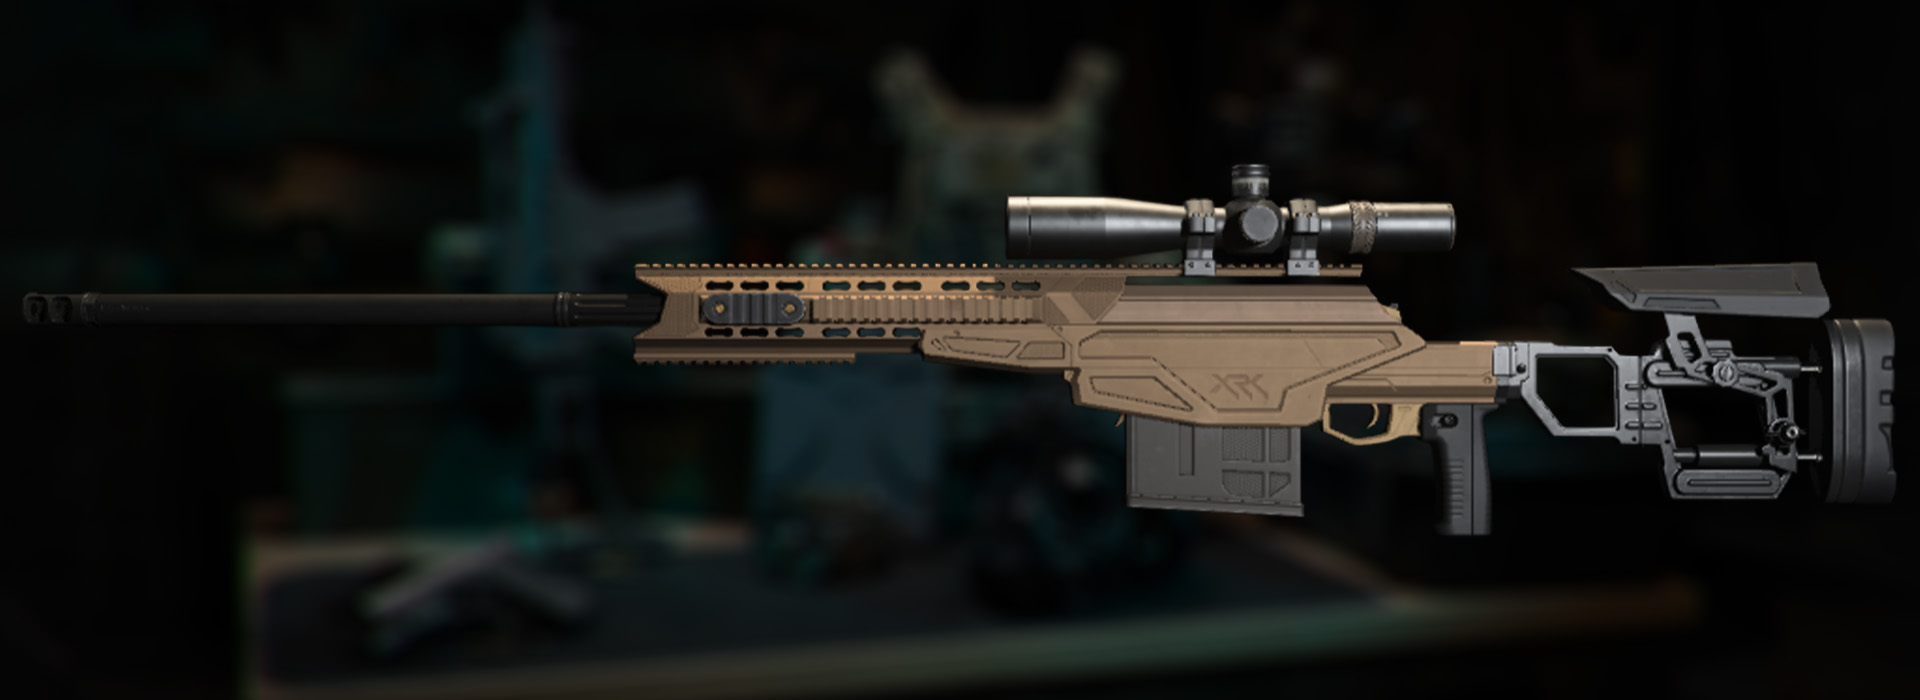 XRK Stalker Sniper Rifle in Call of Duty MW3 and Warzone